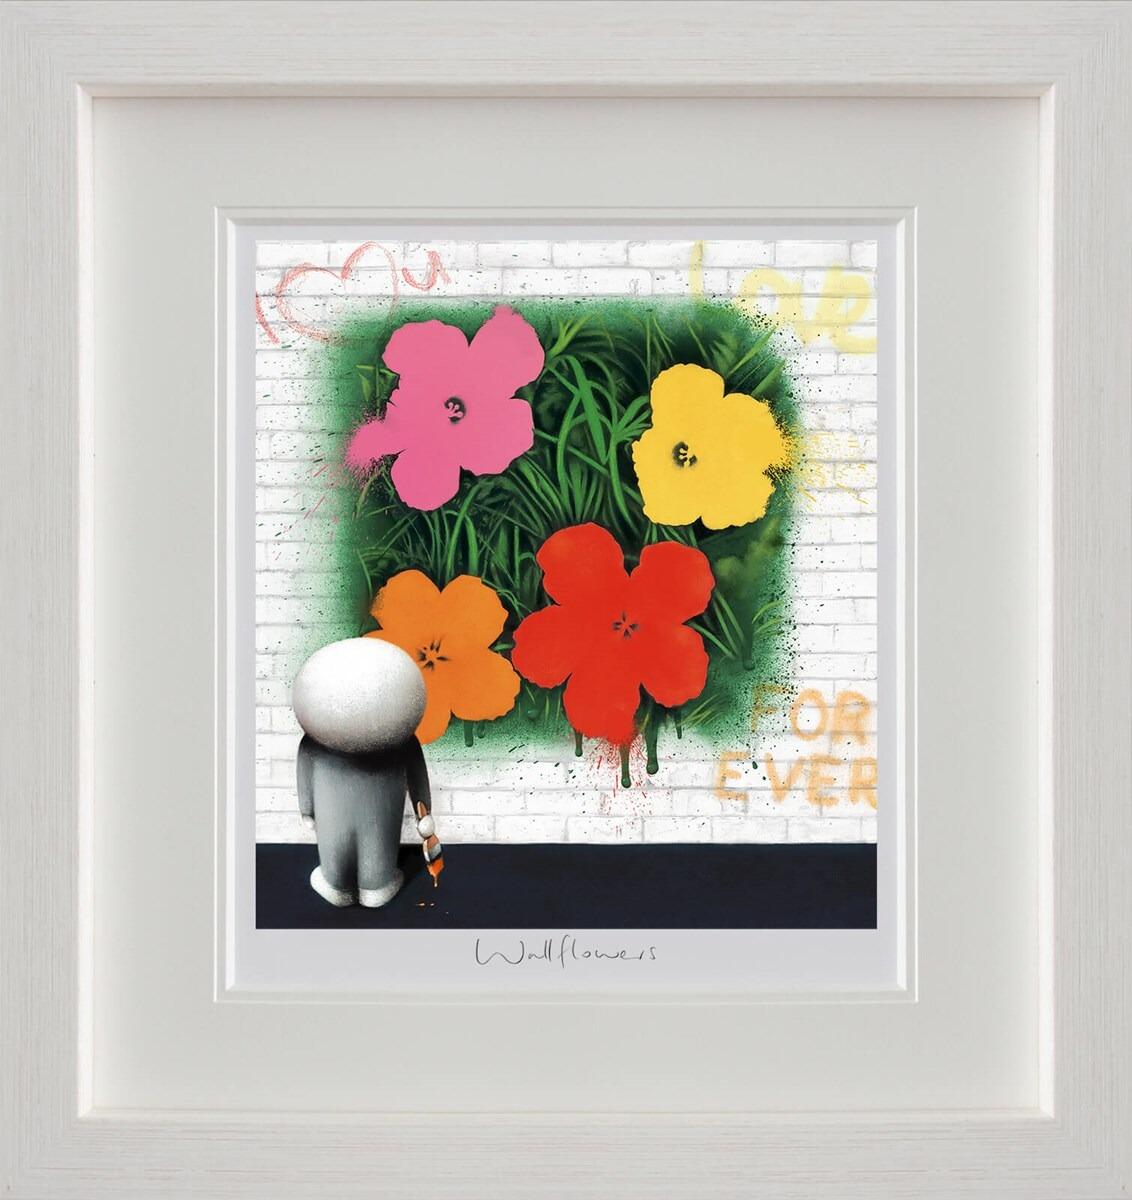 Wallflowers by Doug Hyde - Limited Edition art print ZHYD775